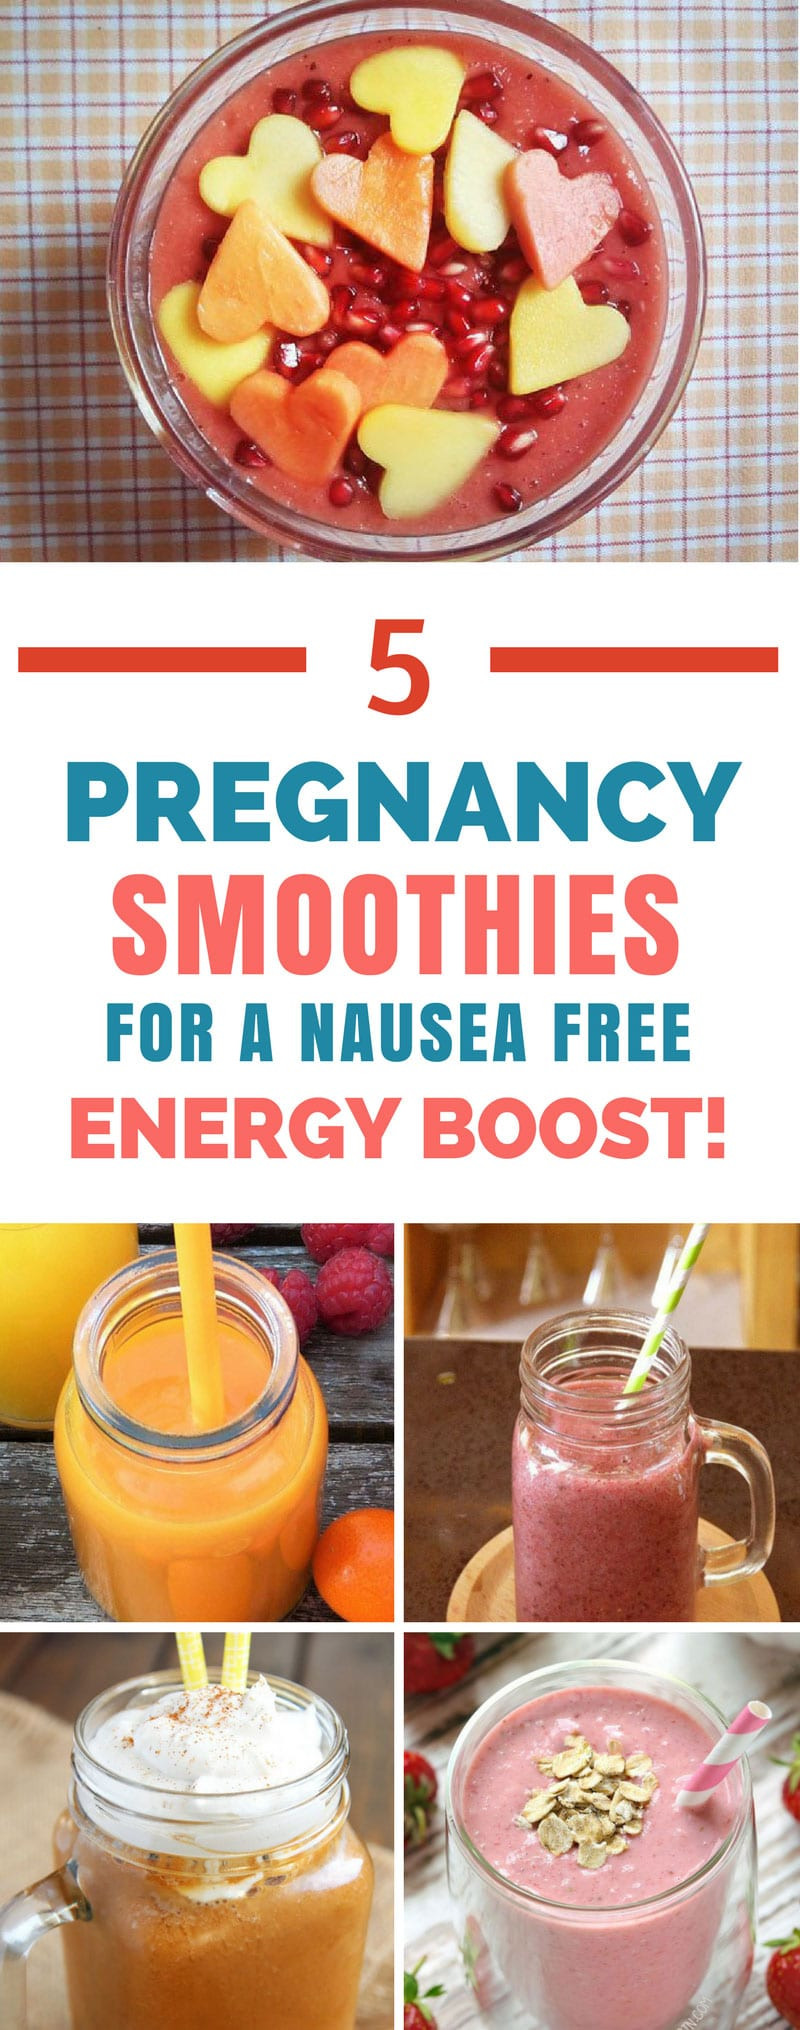 Healthy Smoothies During Pregnancy
 5 Healthy Pregnancy Smoothie Recipes that ll Help You Feel